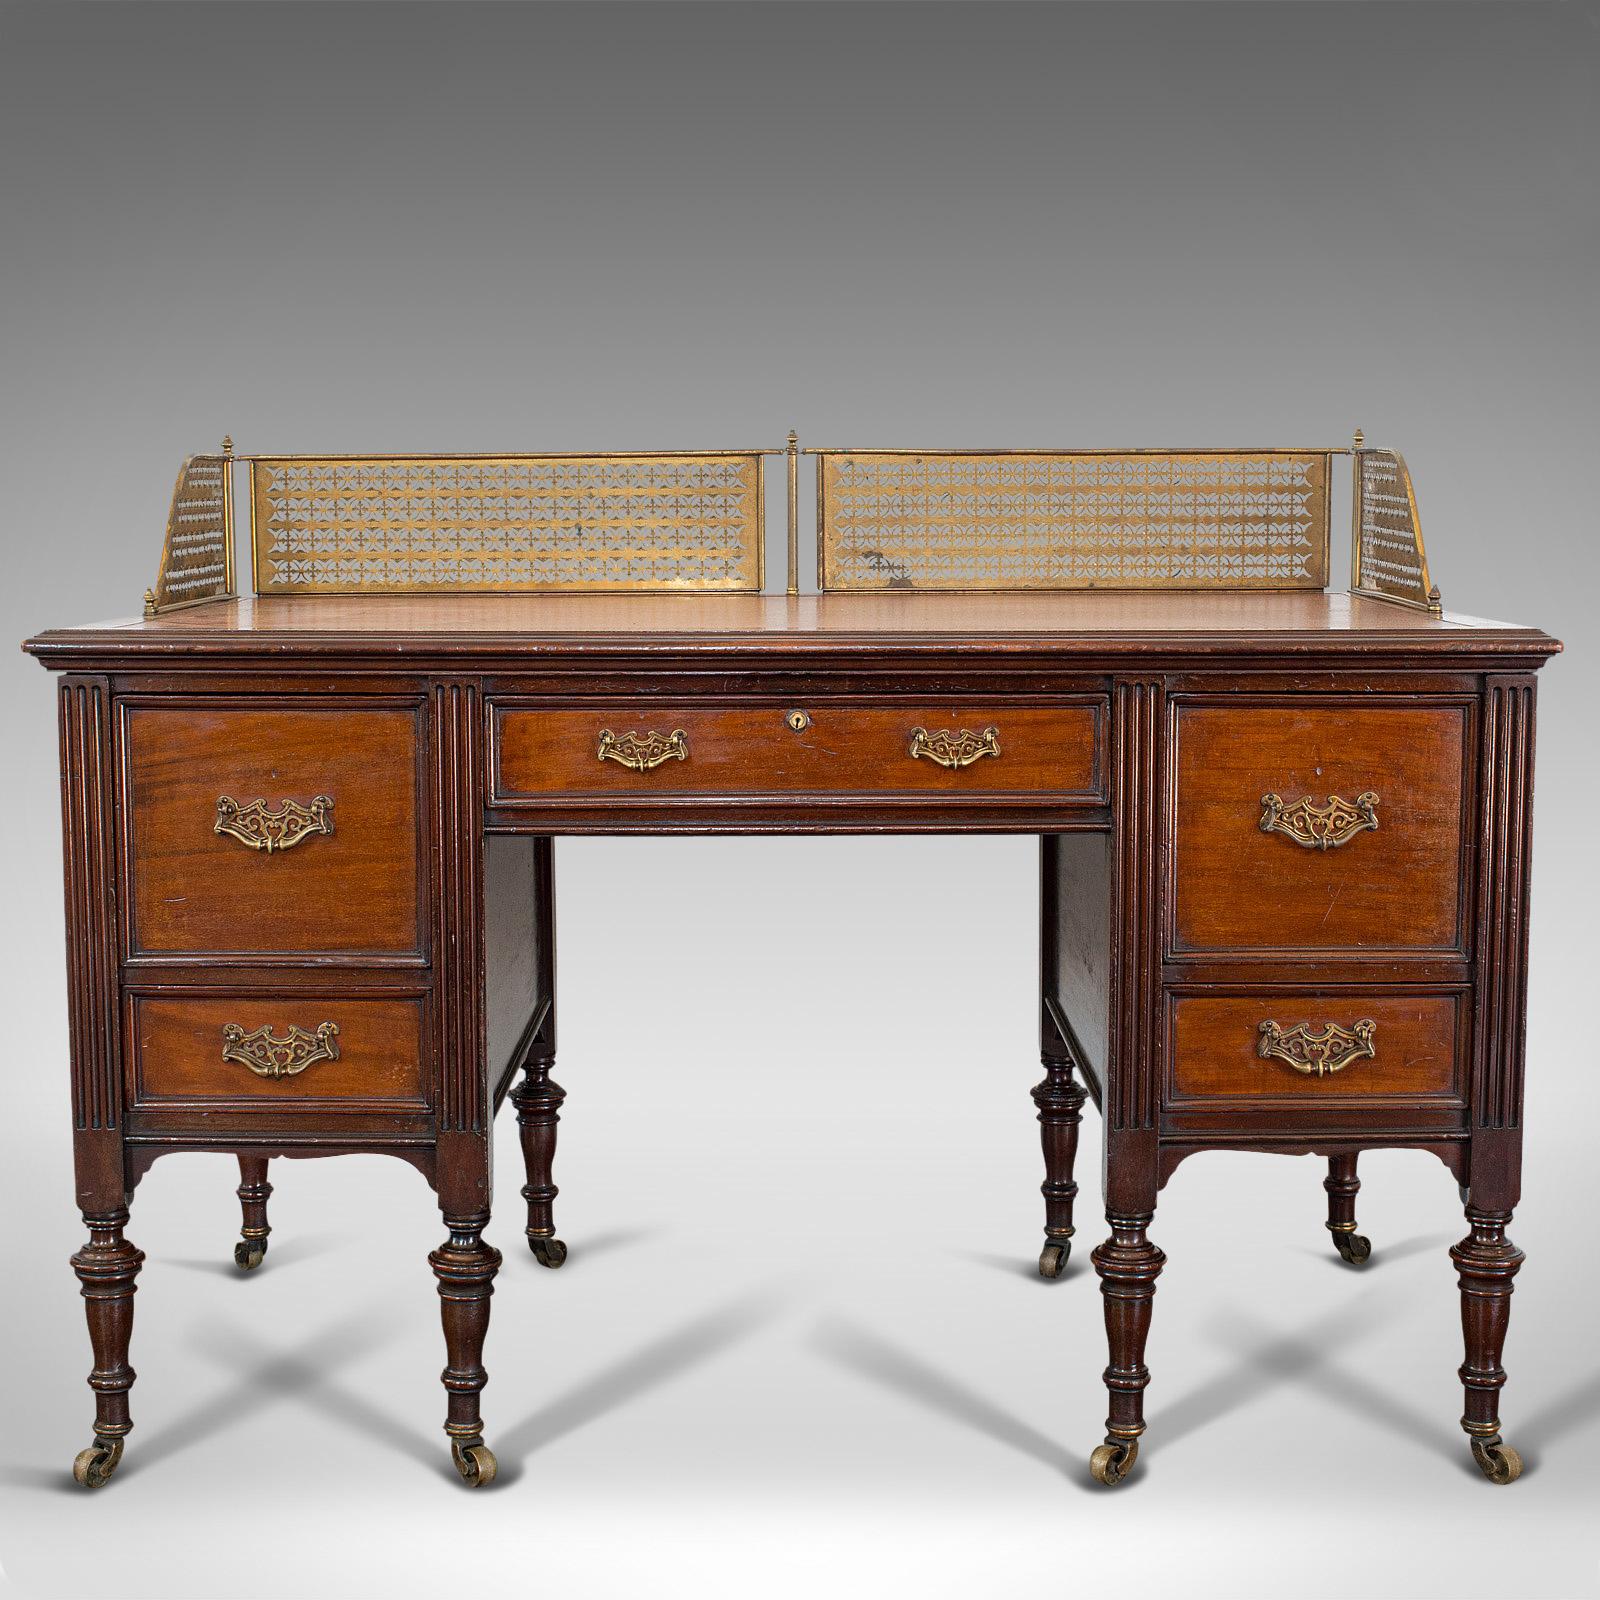 This is an antique writing desk. An English, walnut office desk by the renowned Maple & Co of London, dating to the late 19th century, circa 1900.

Elegant writer's desk from the coveted Maple & Co
Displays a desirable aged patina
Select walnut